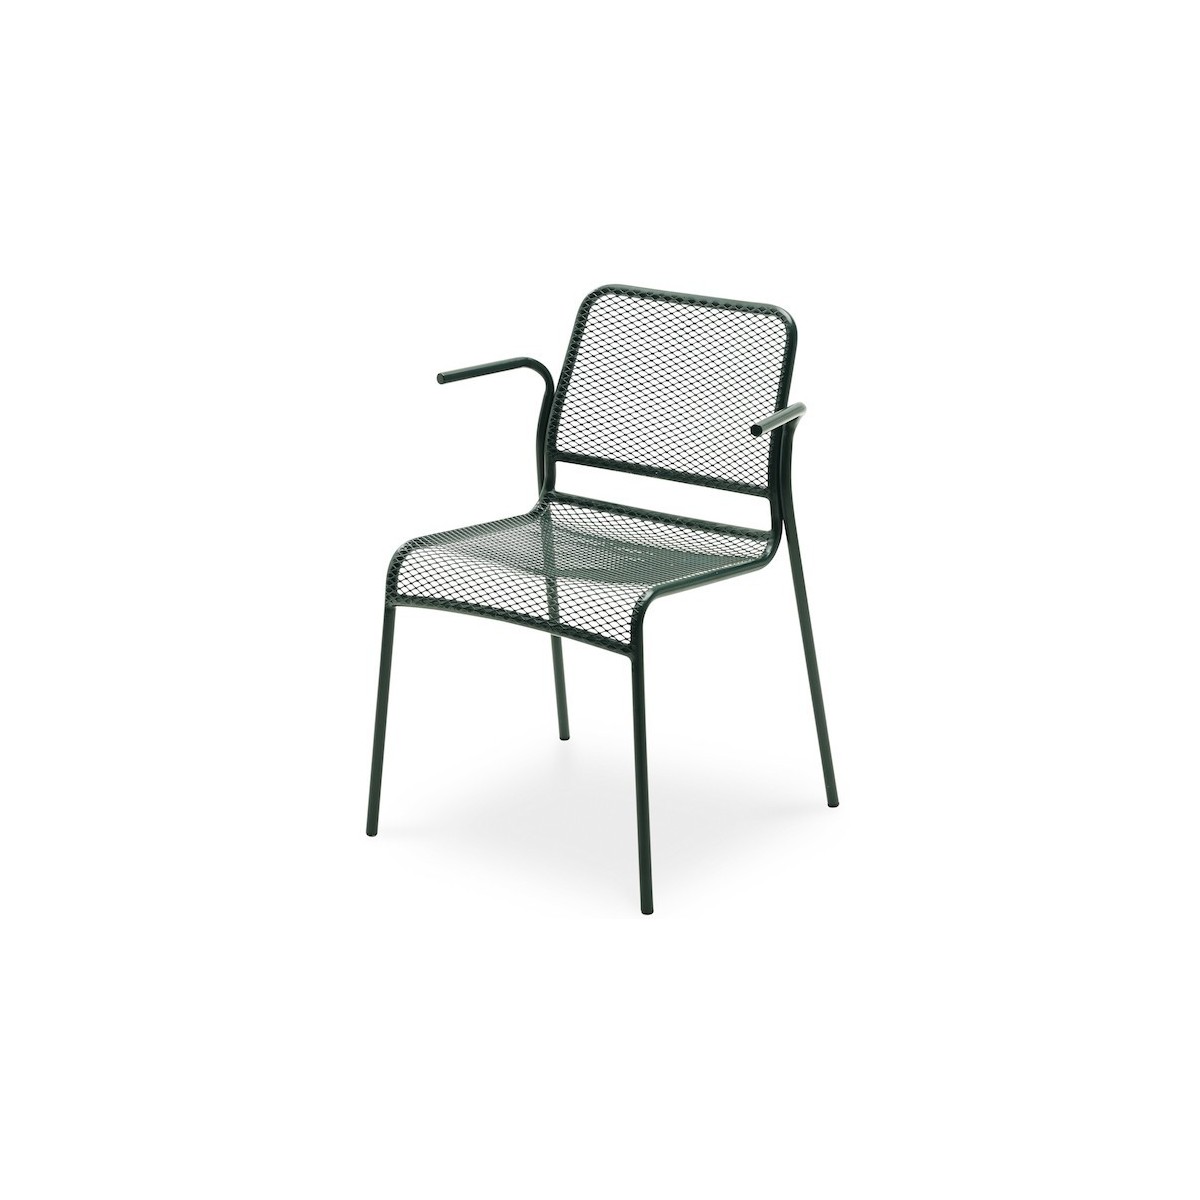 SOLD OUT hunter green - Mira armchair